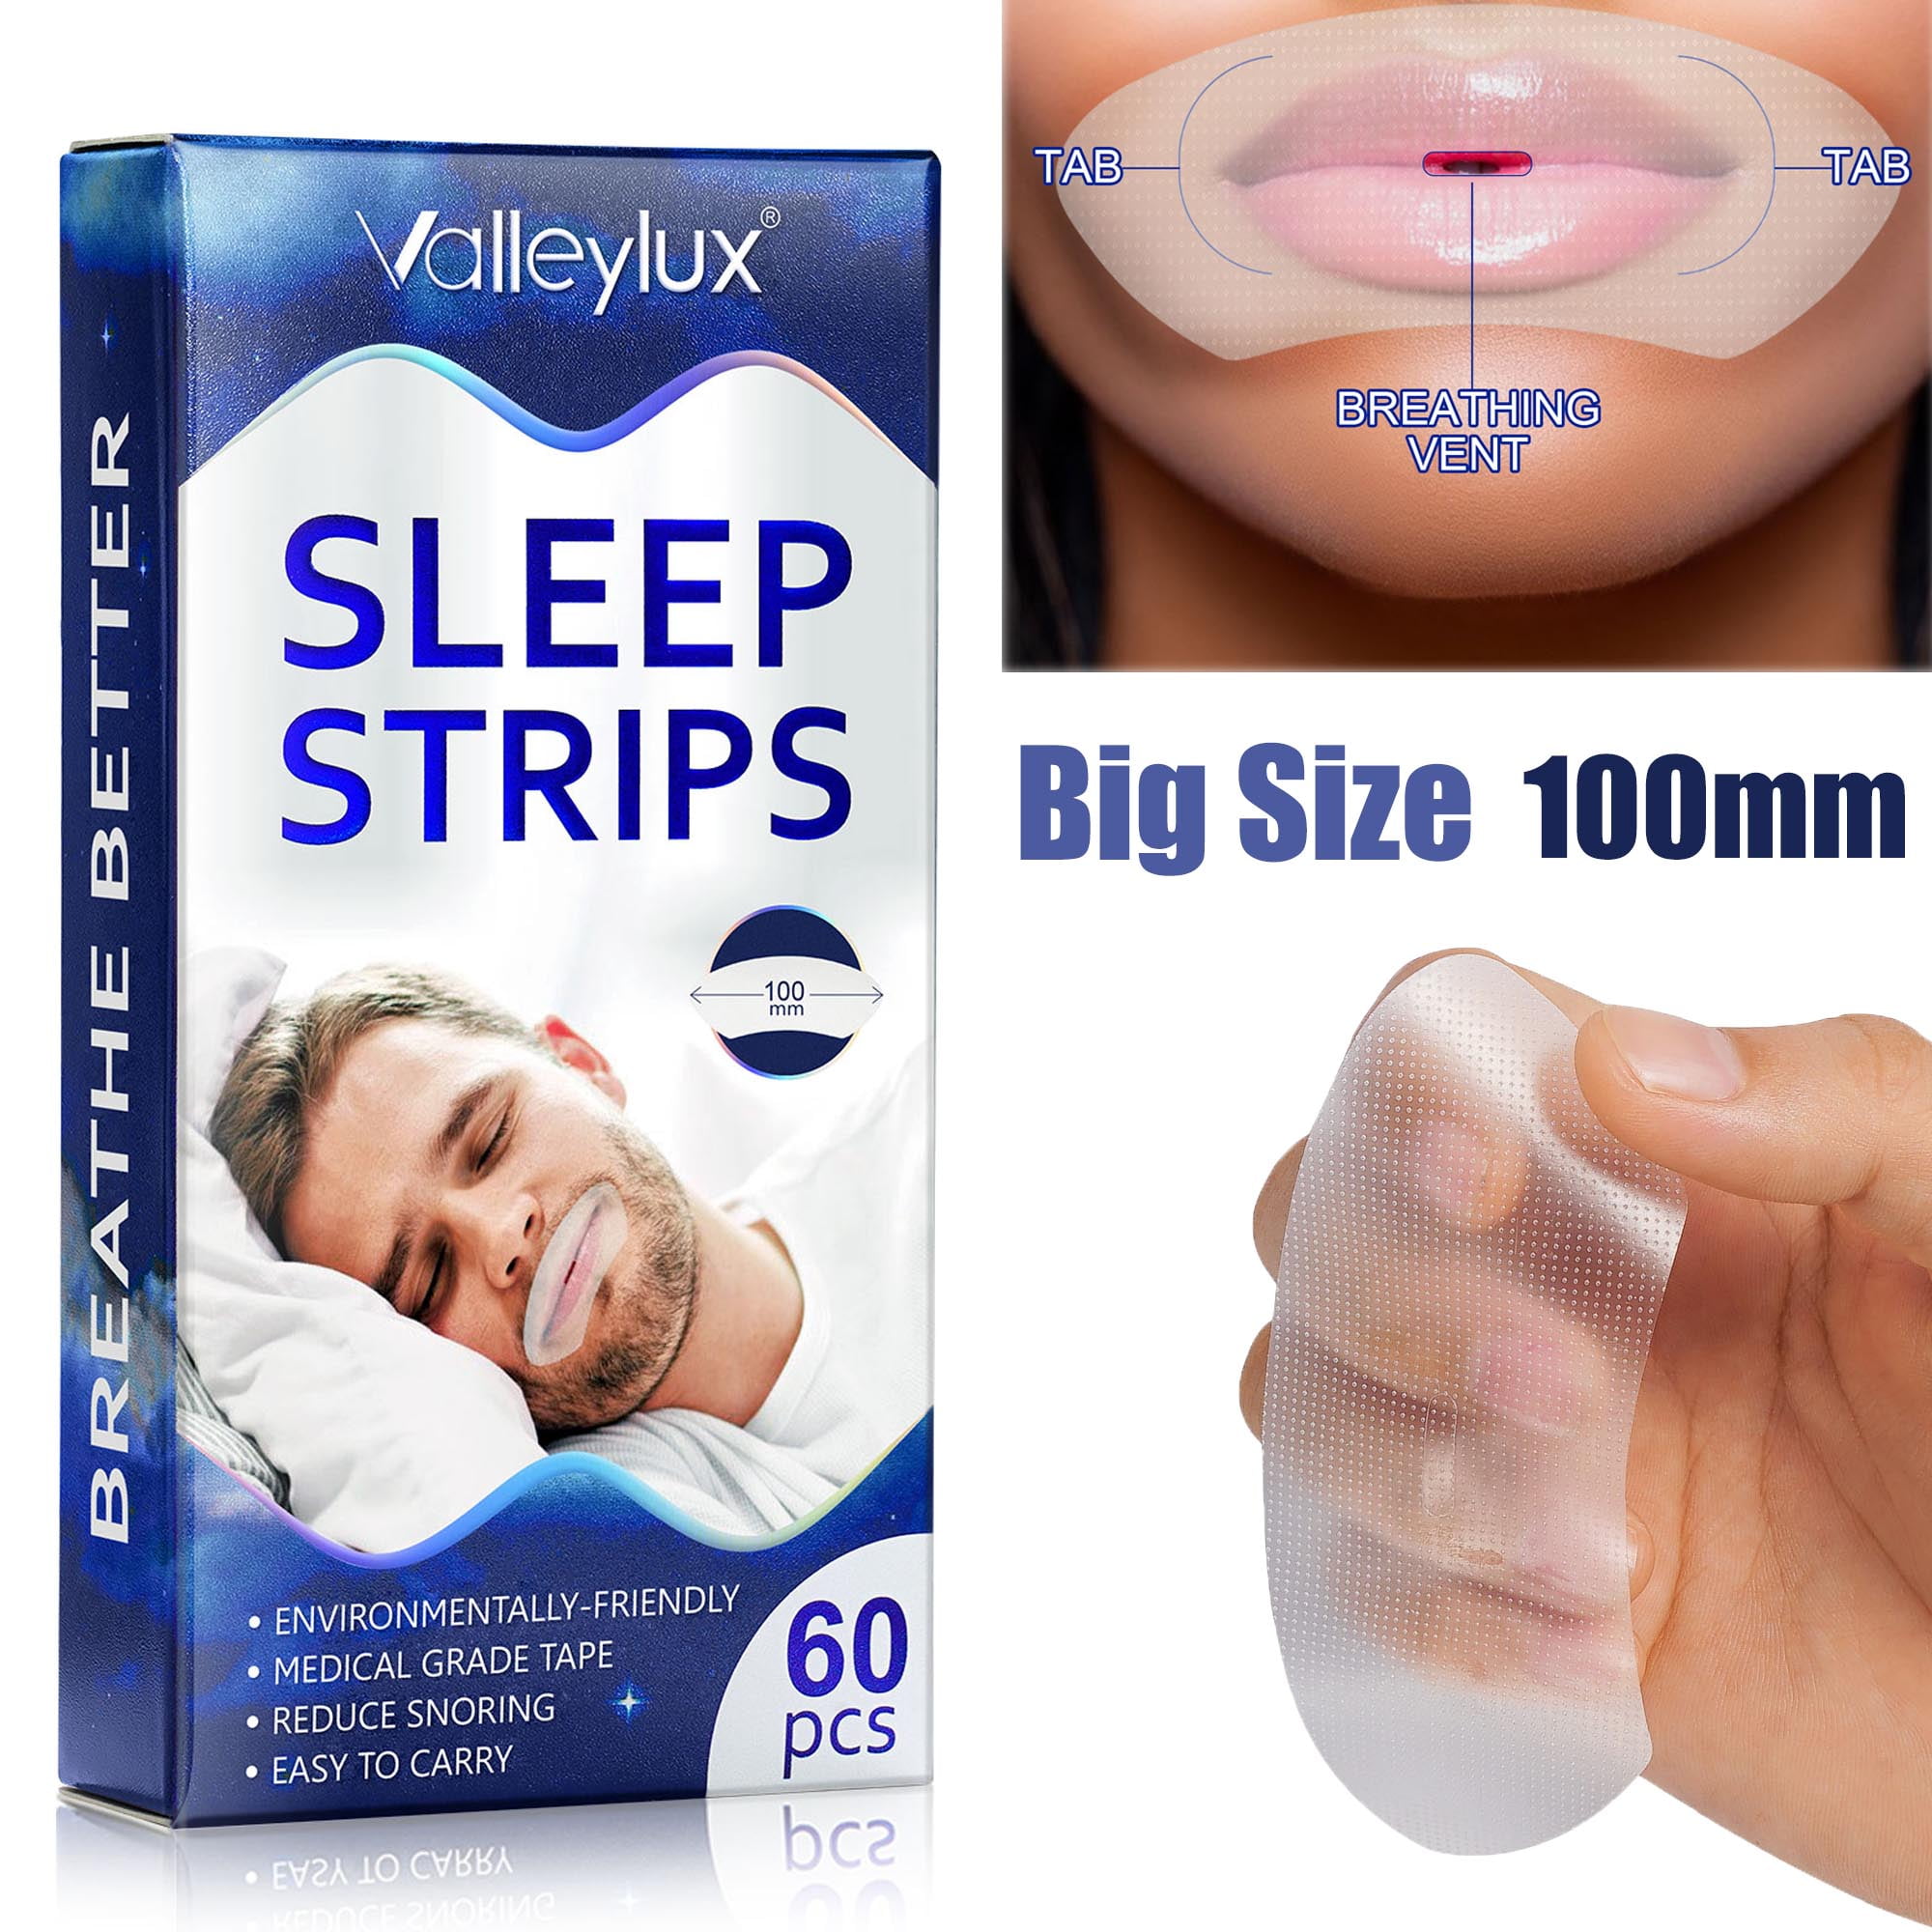 Valleylux Mouth Tape 60PCS Snore Strips 100mm Large Size Snore Stopper  Sleep Strips Better Nose Breathing Relieve Mouth Dryness